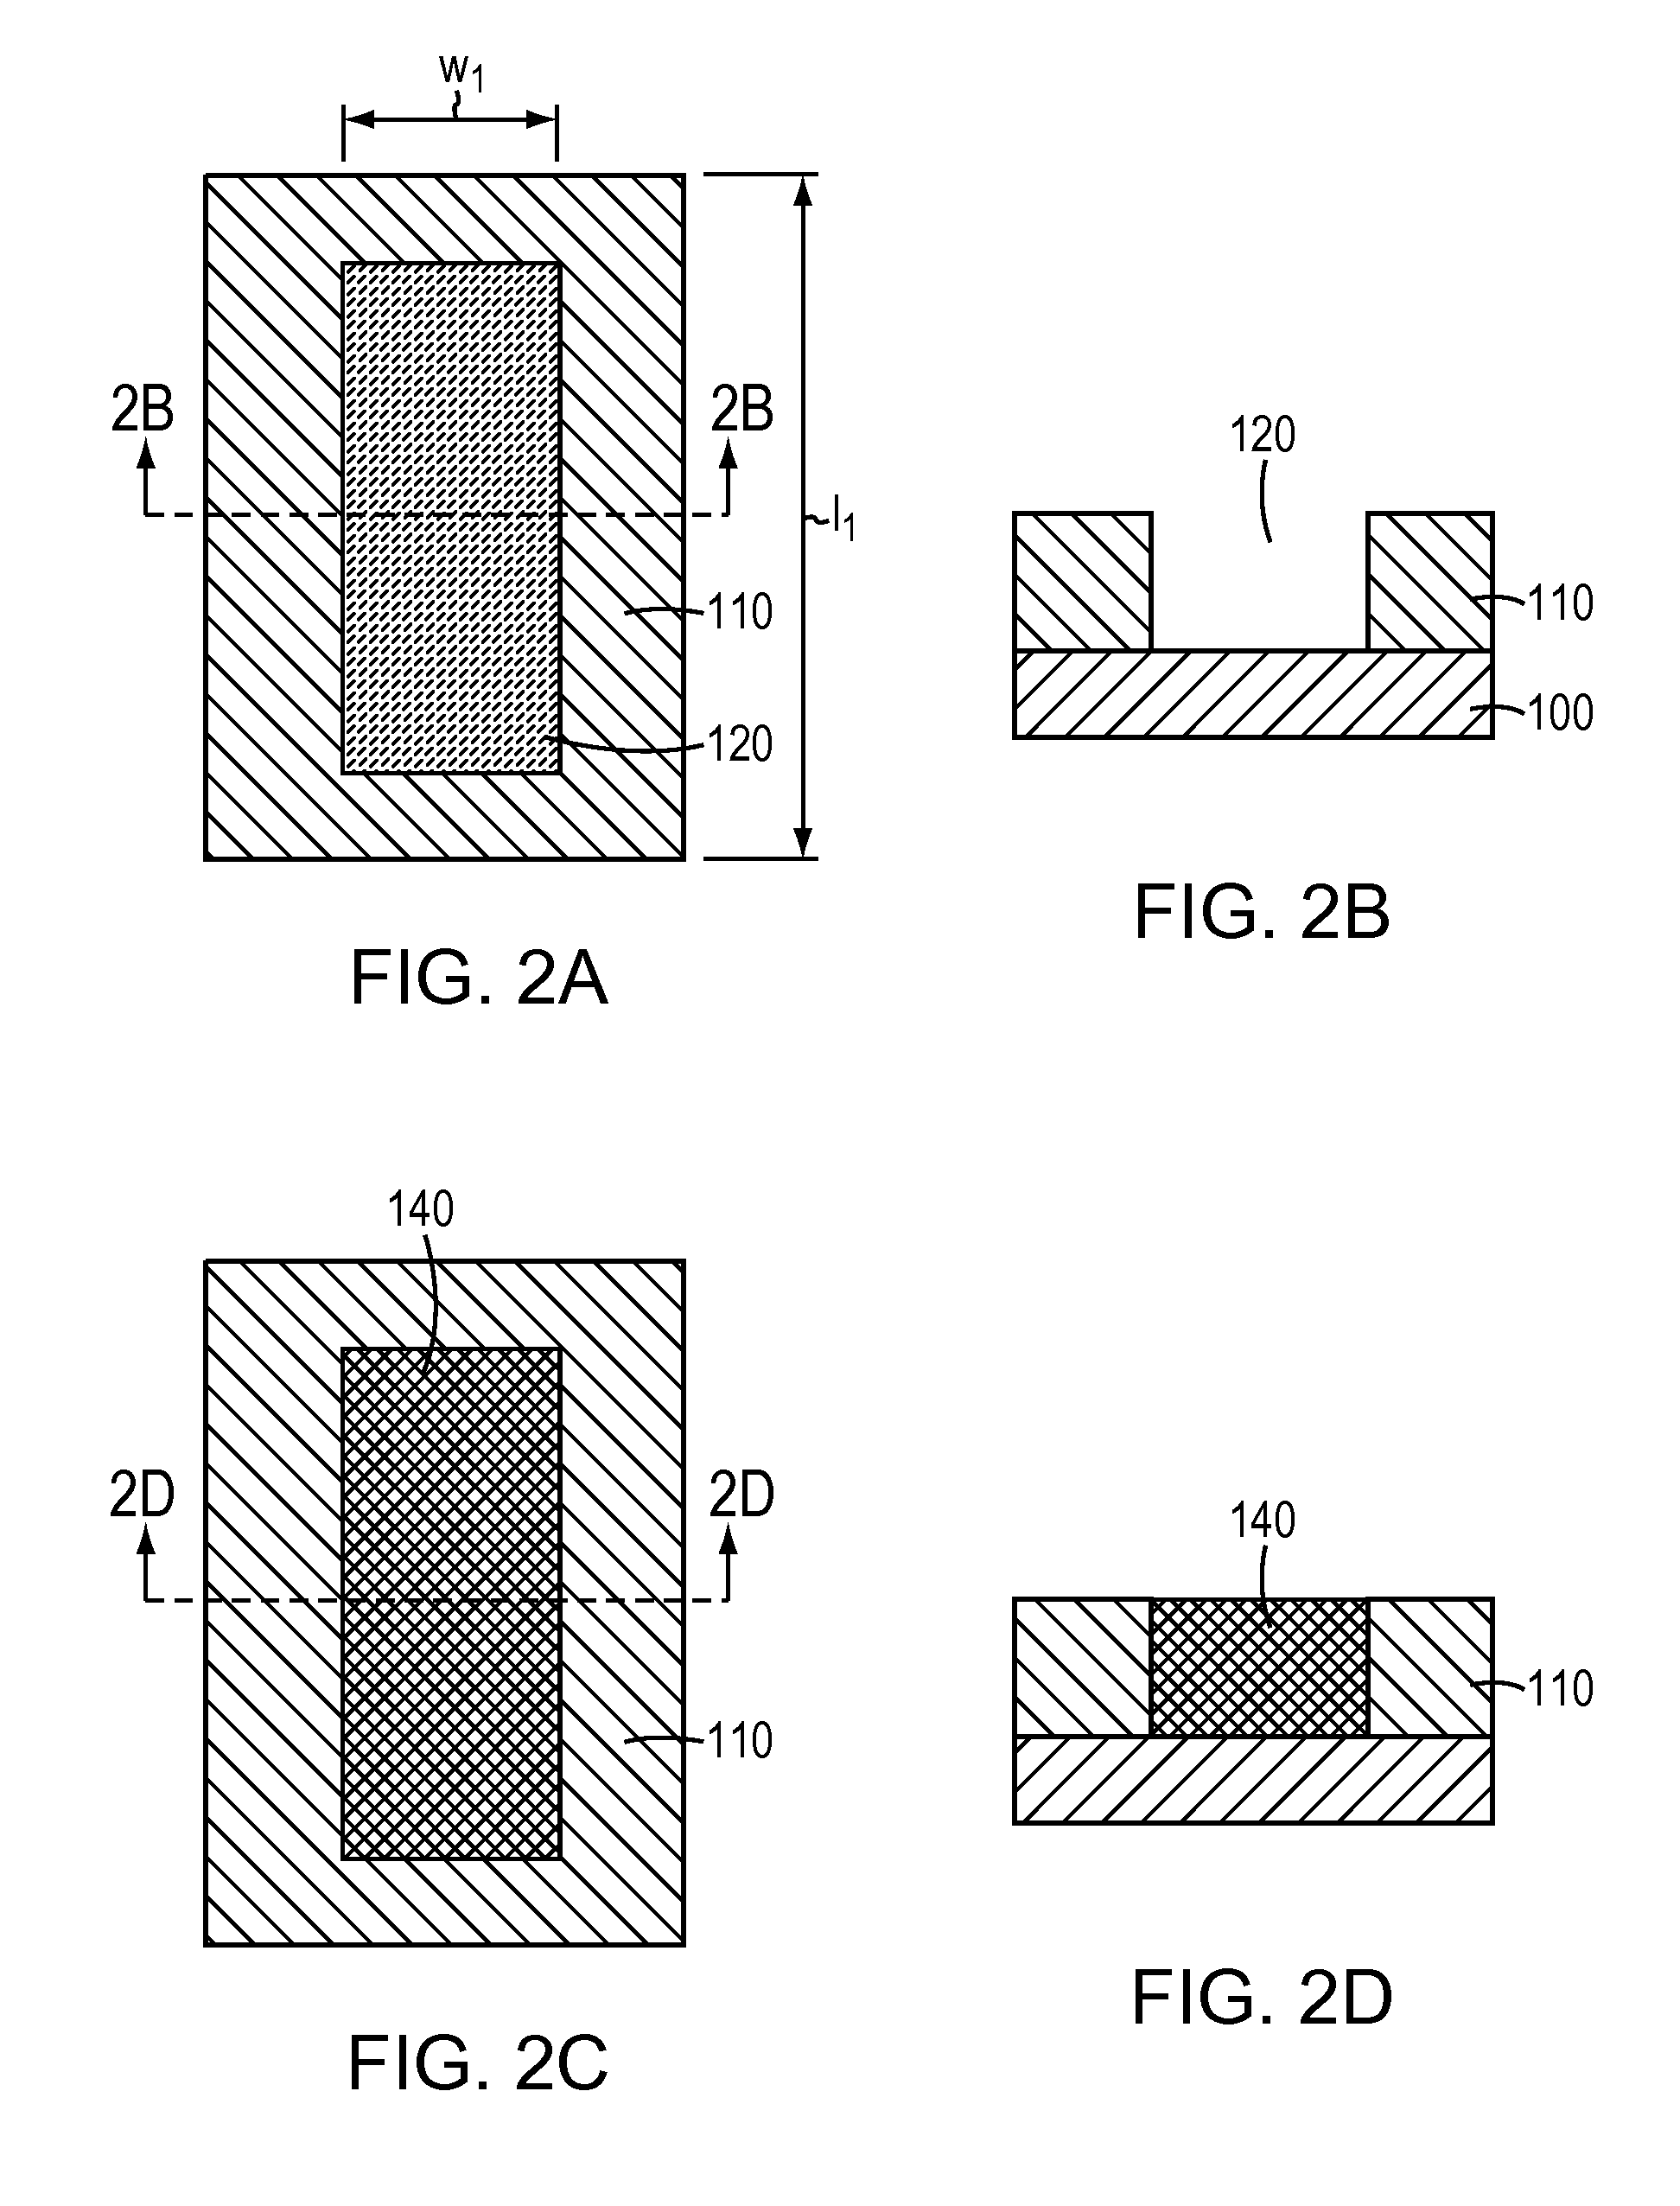 Solutions for integrated circuit integration of alternative active area materials